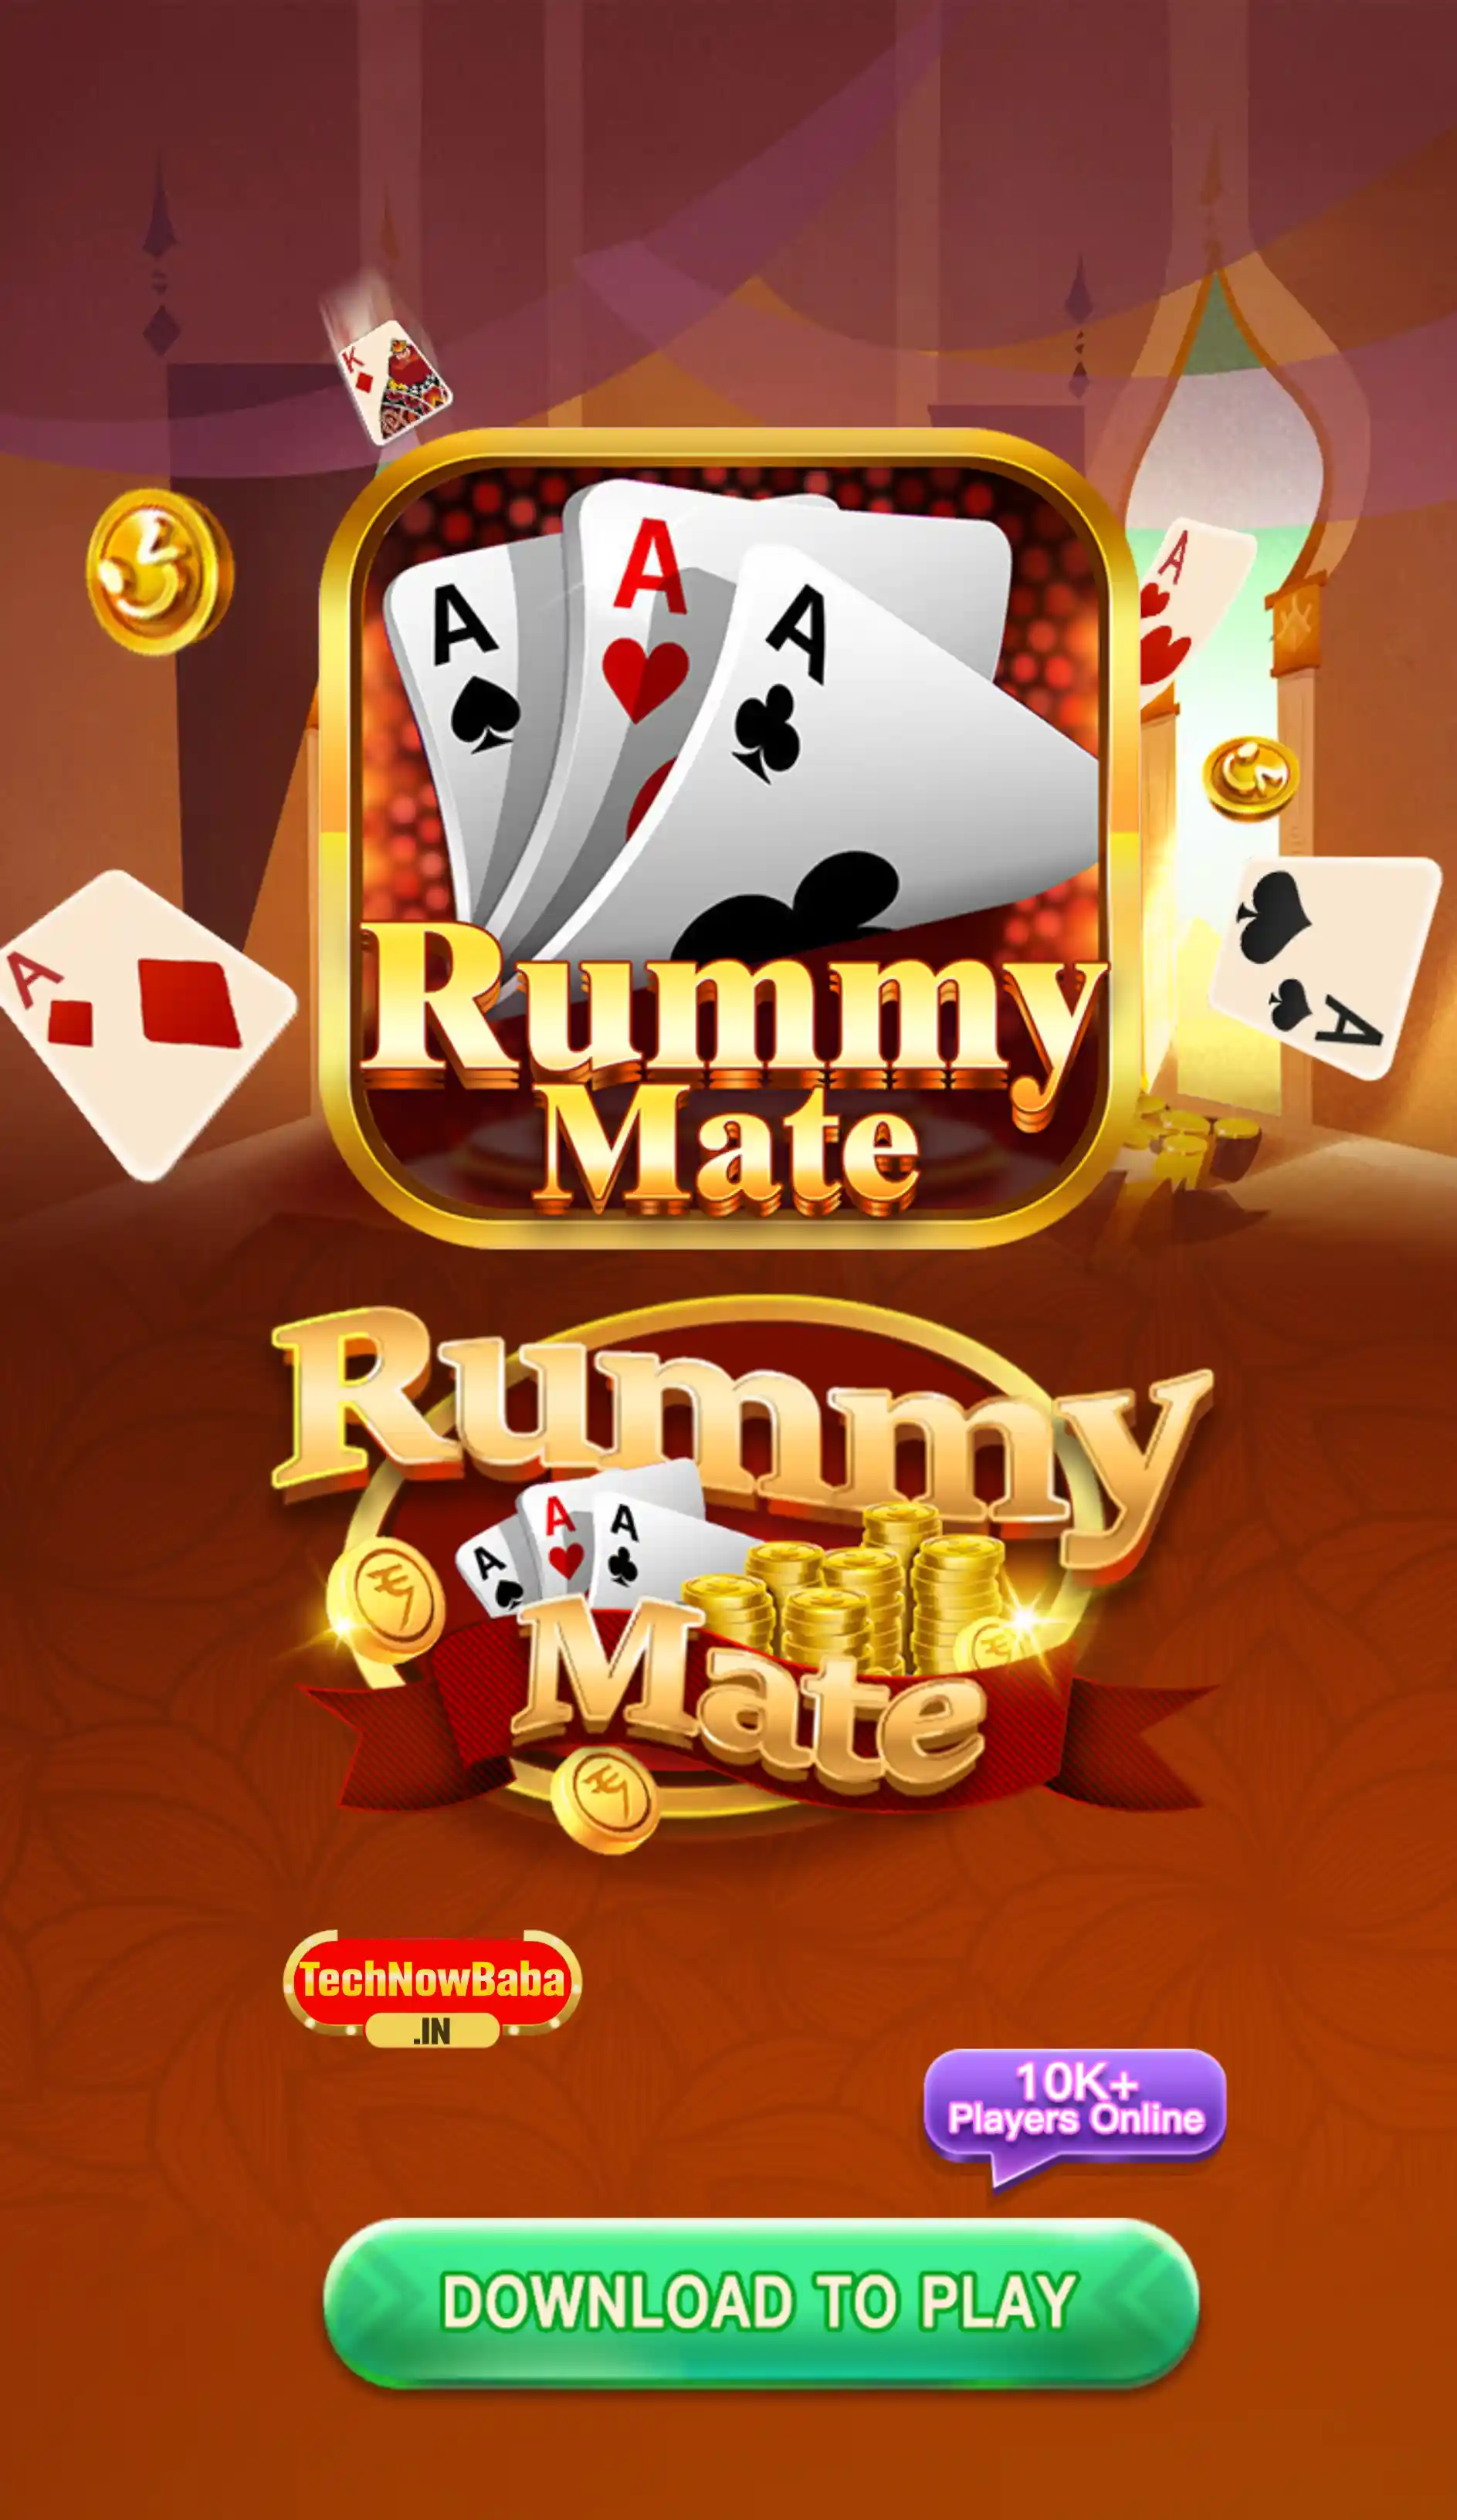 Rummy Mate App Download TechNow Baba